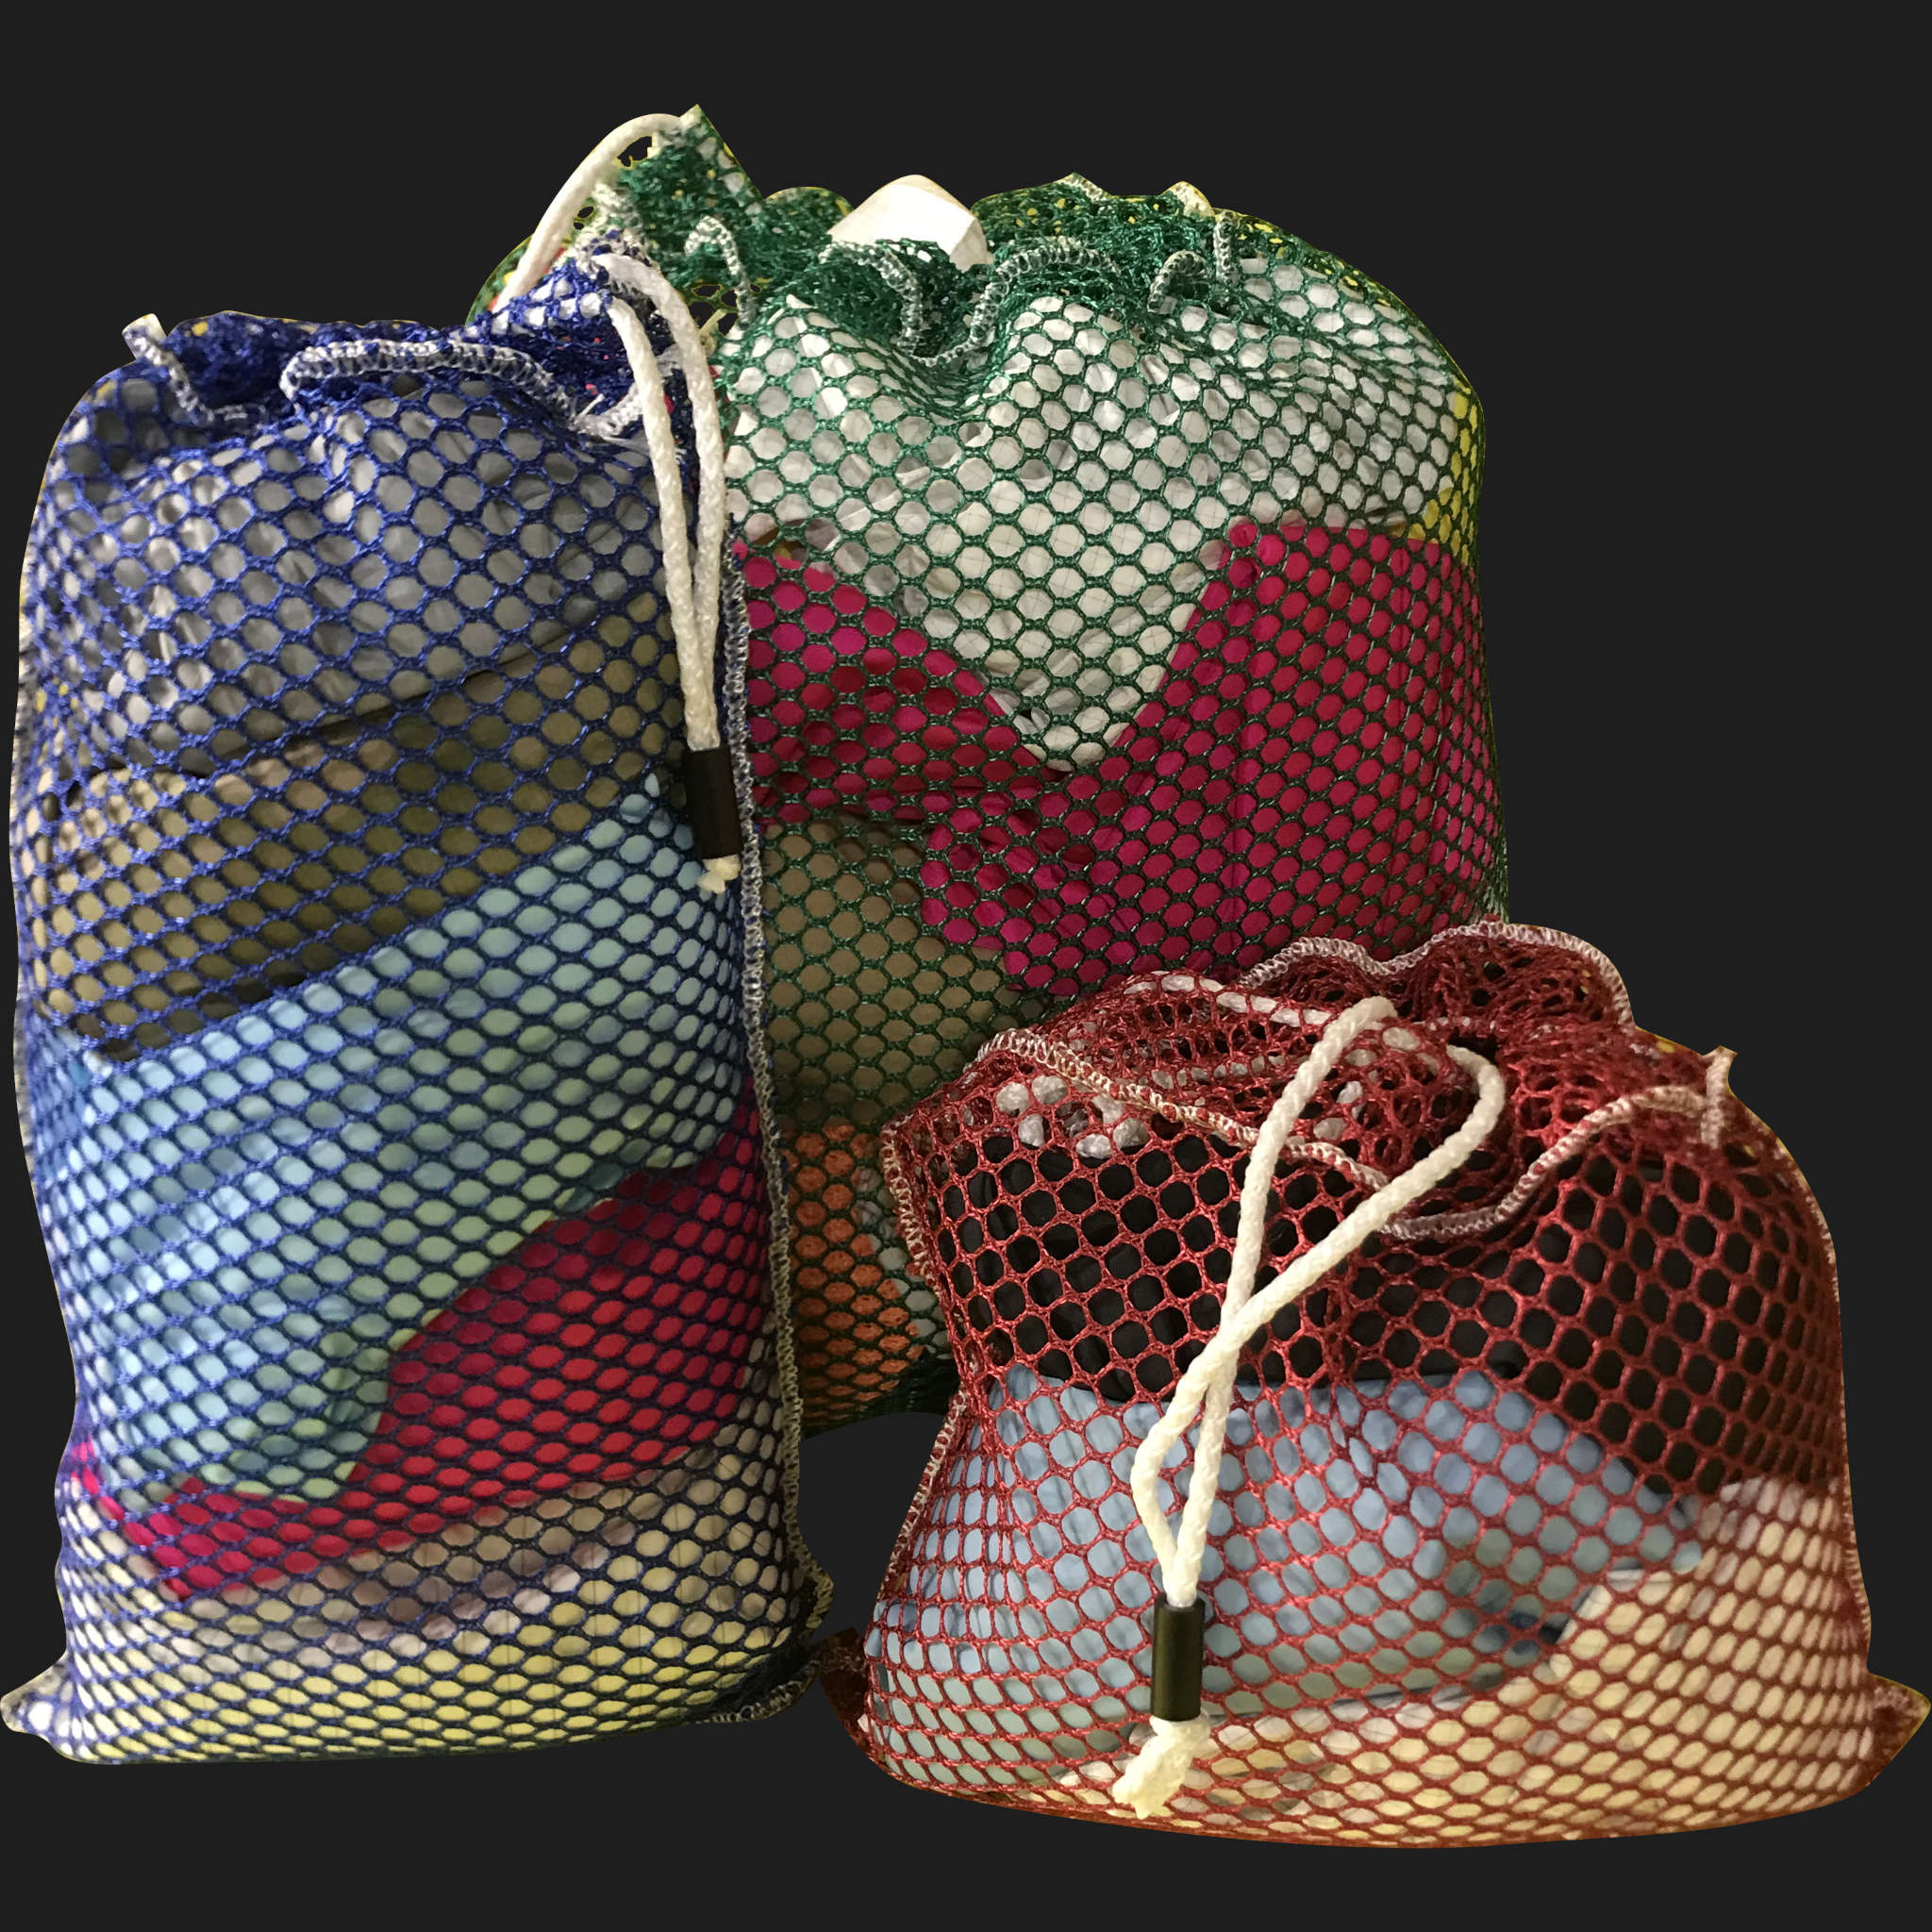 14" x 26" Customized Mesh-Net-Laundry Bags Heavy Duty with Cord and barrellock closure